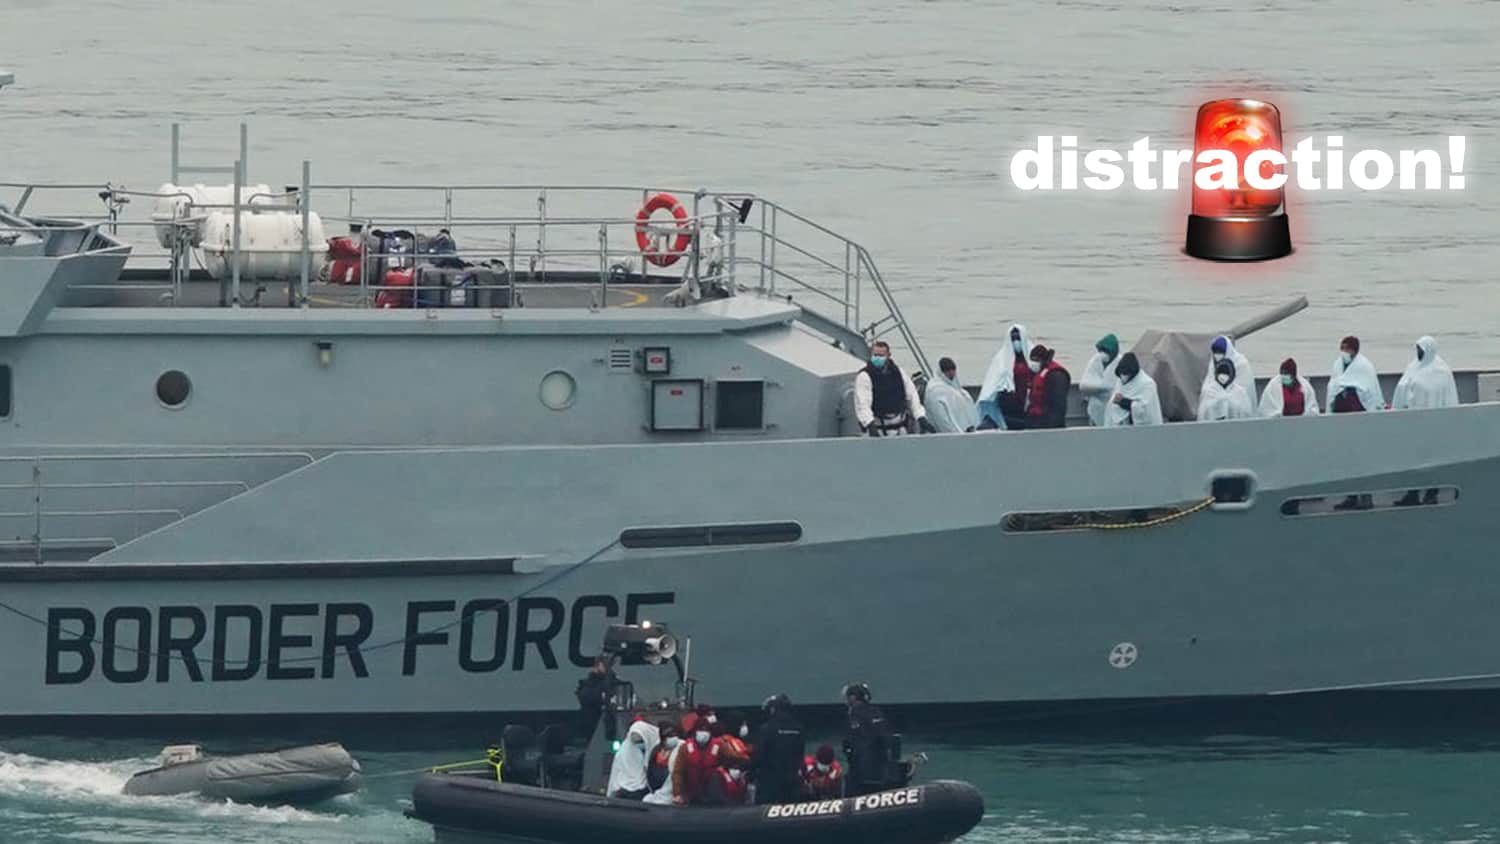 Distraction alert! Military drafted in to tackle migrant crossings